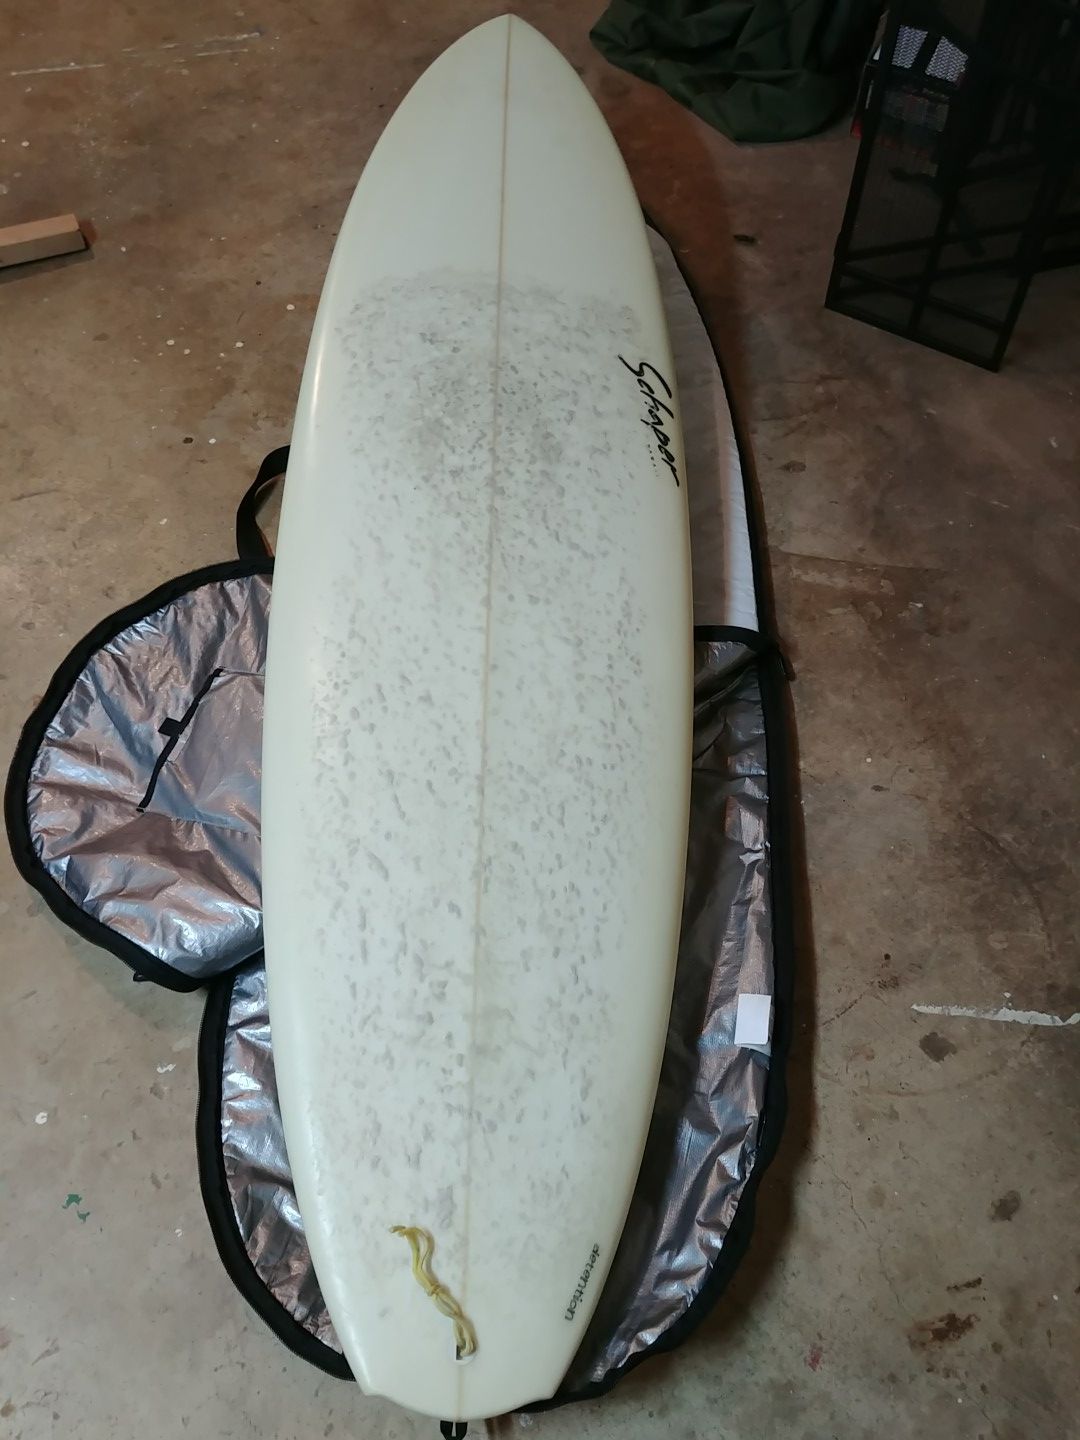 6'4" Schapher Hawaii Surfboard. Comes with bag and fins.